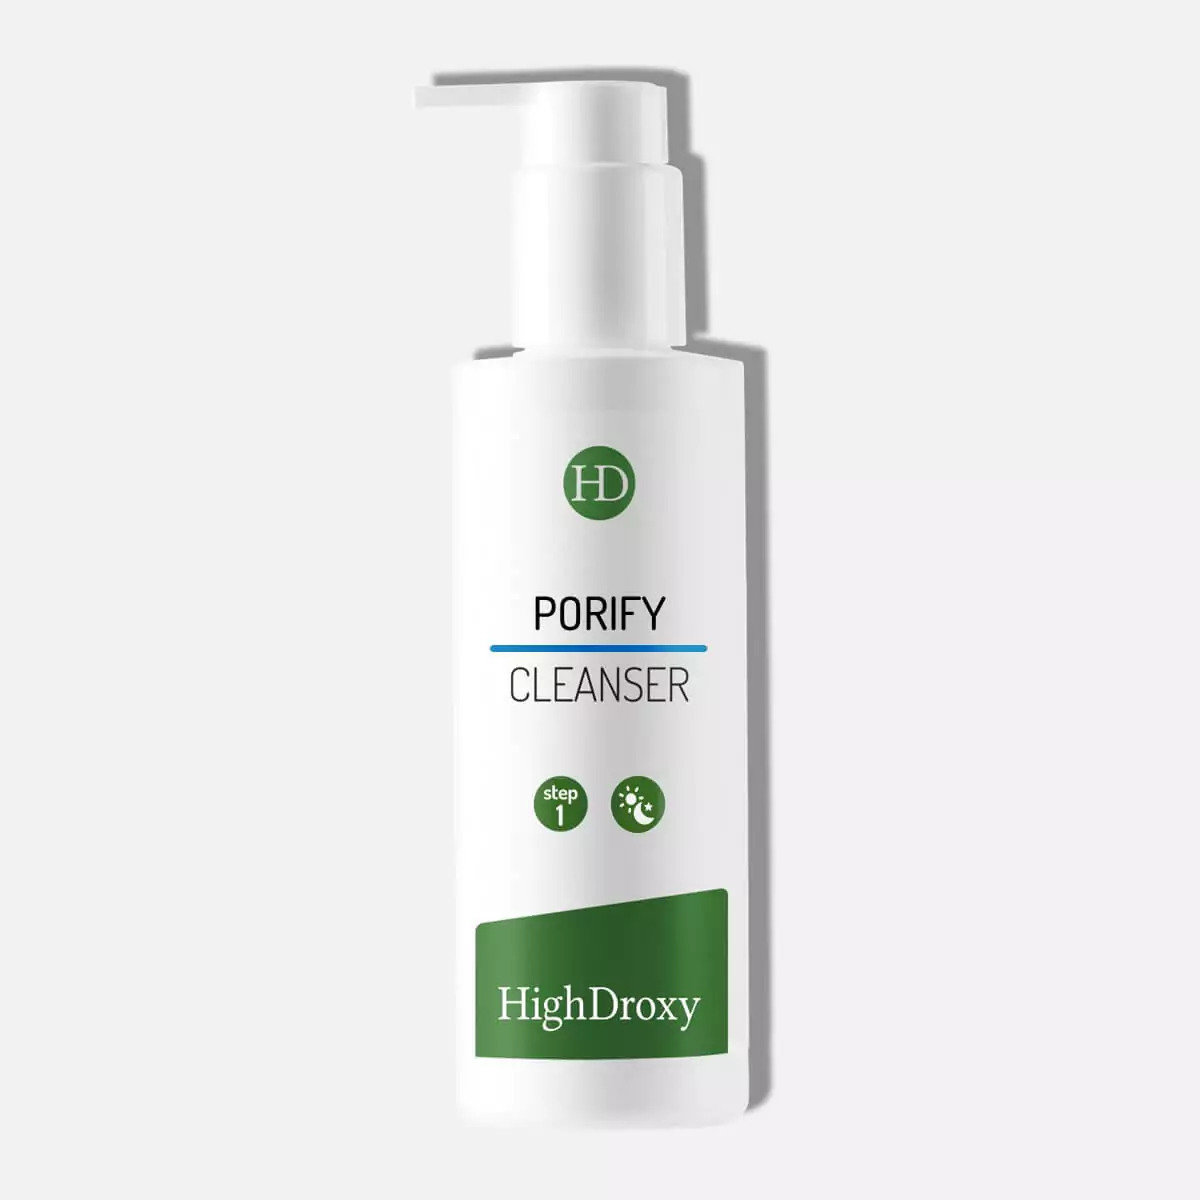 highdroxy-porify-cleanser-vollgroesse-1200-_1_